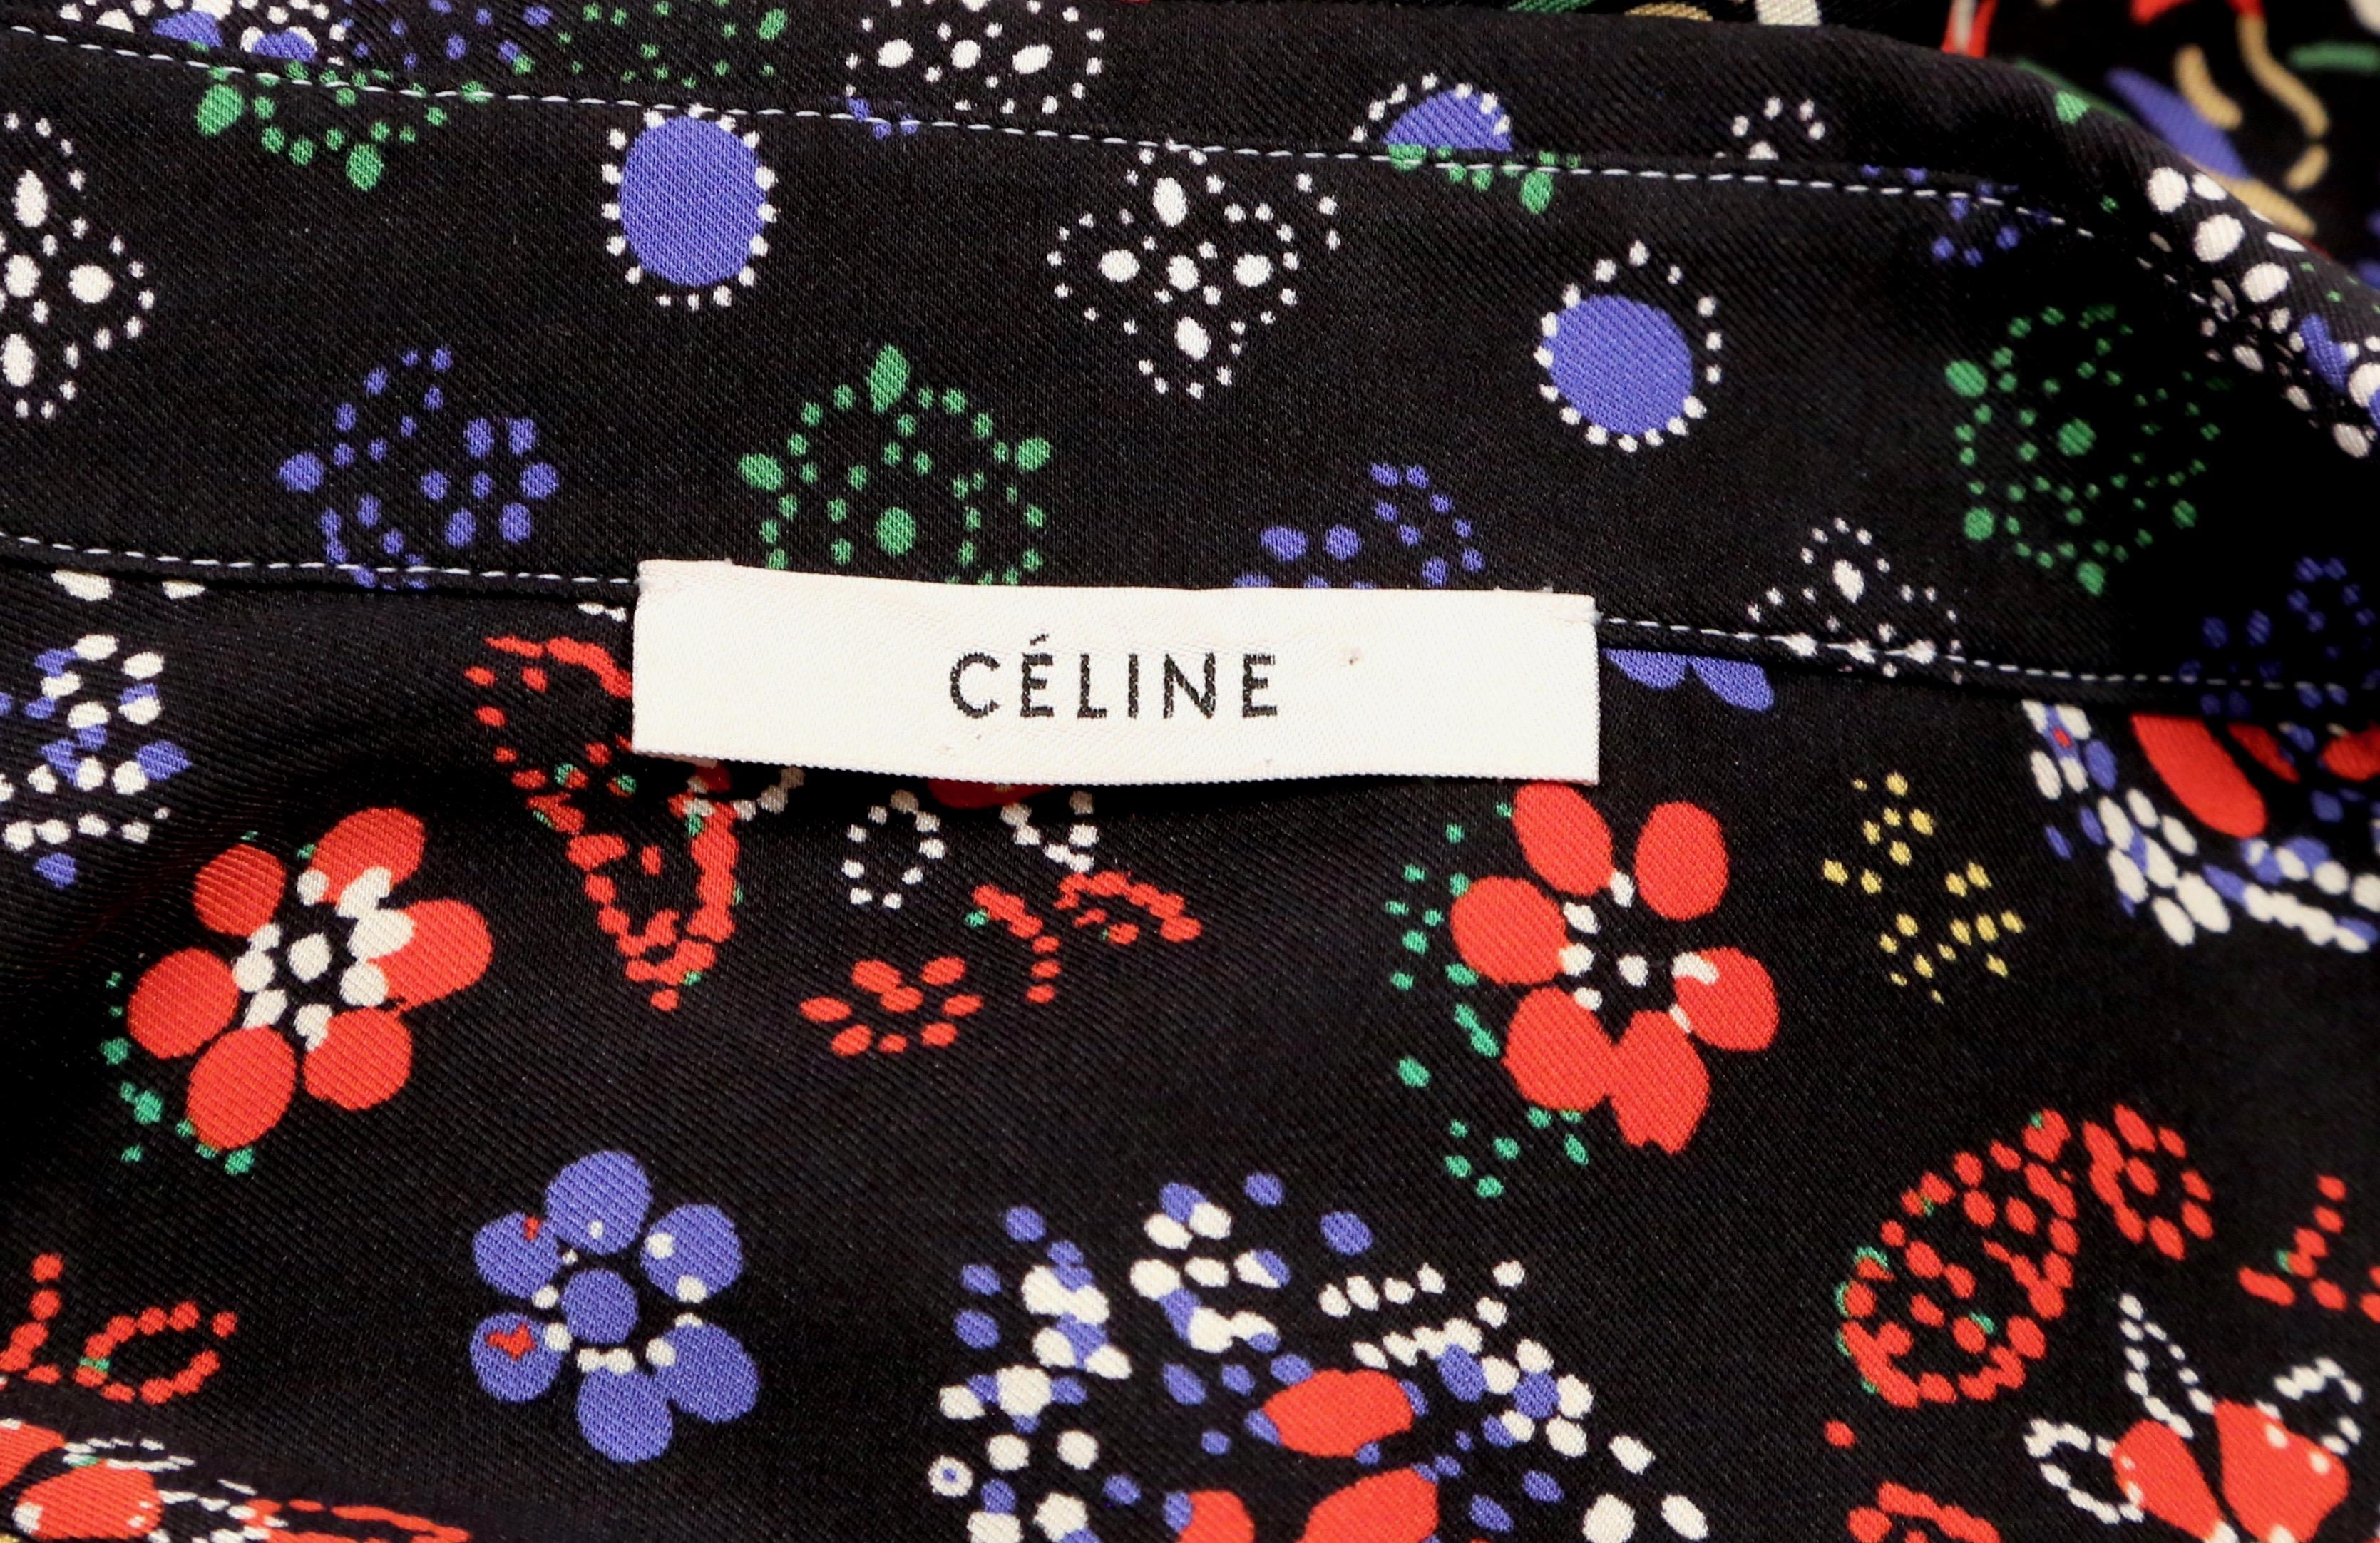 CELINE by PHOEBE PHILO floral printed silk shirt with ties 2